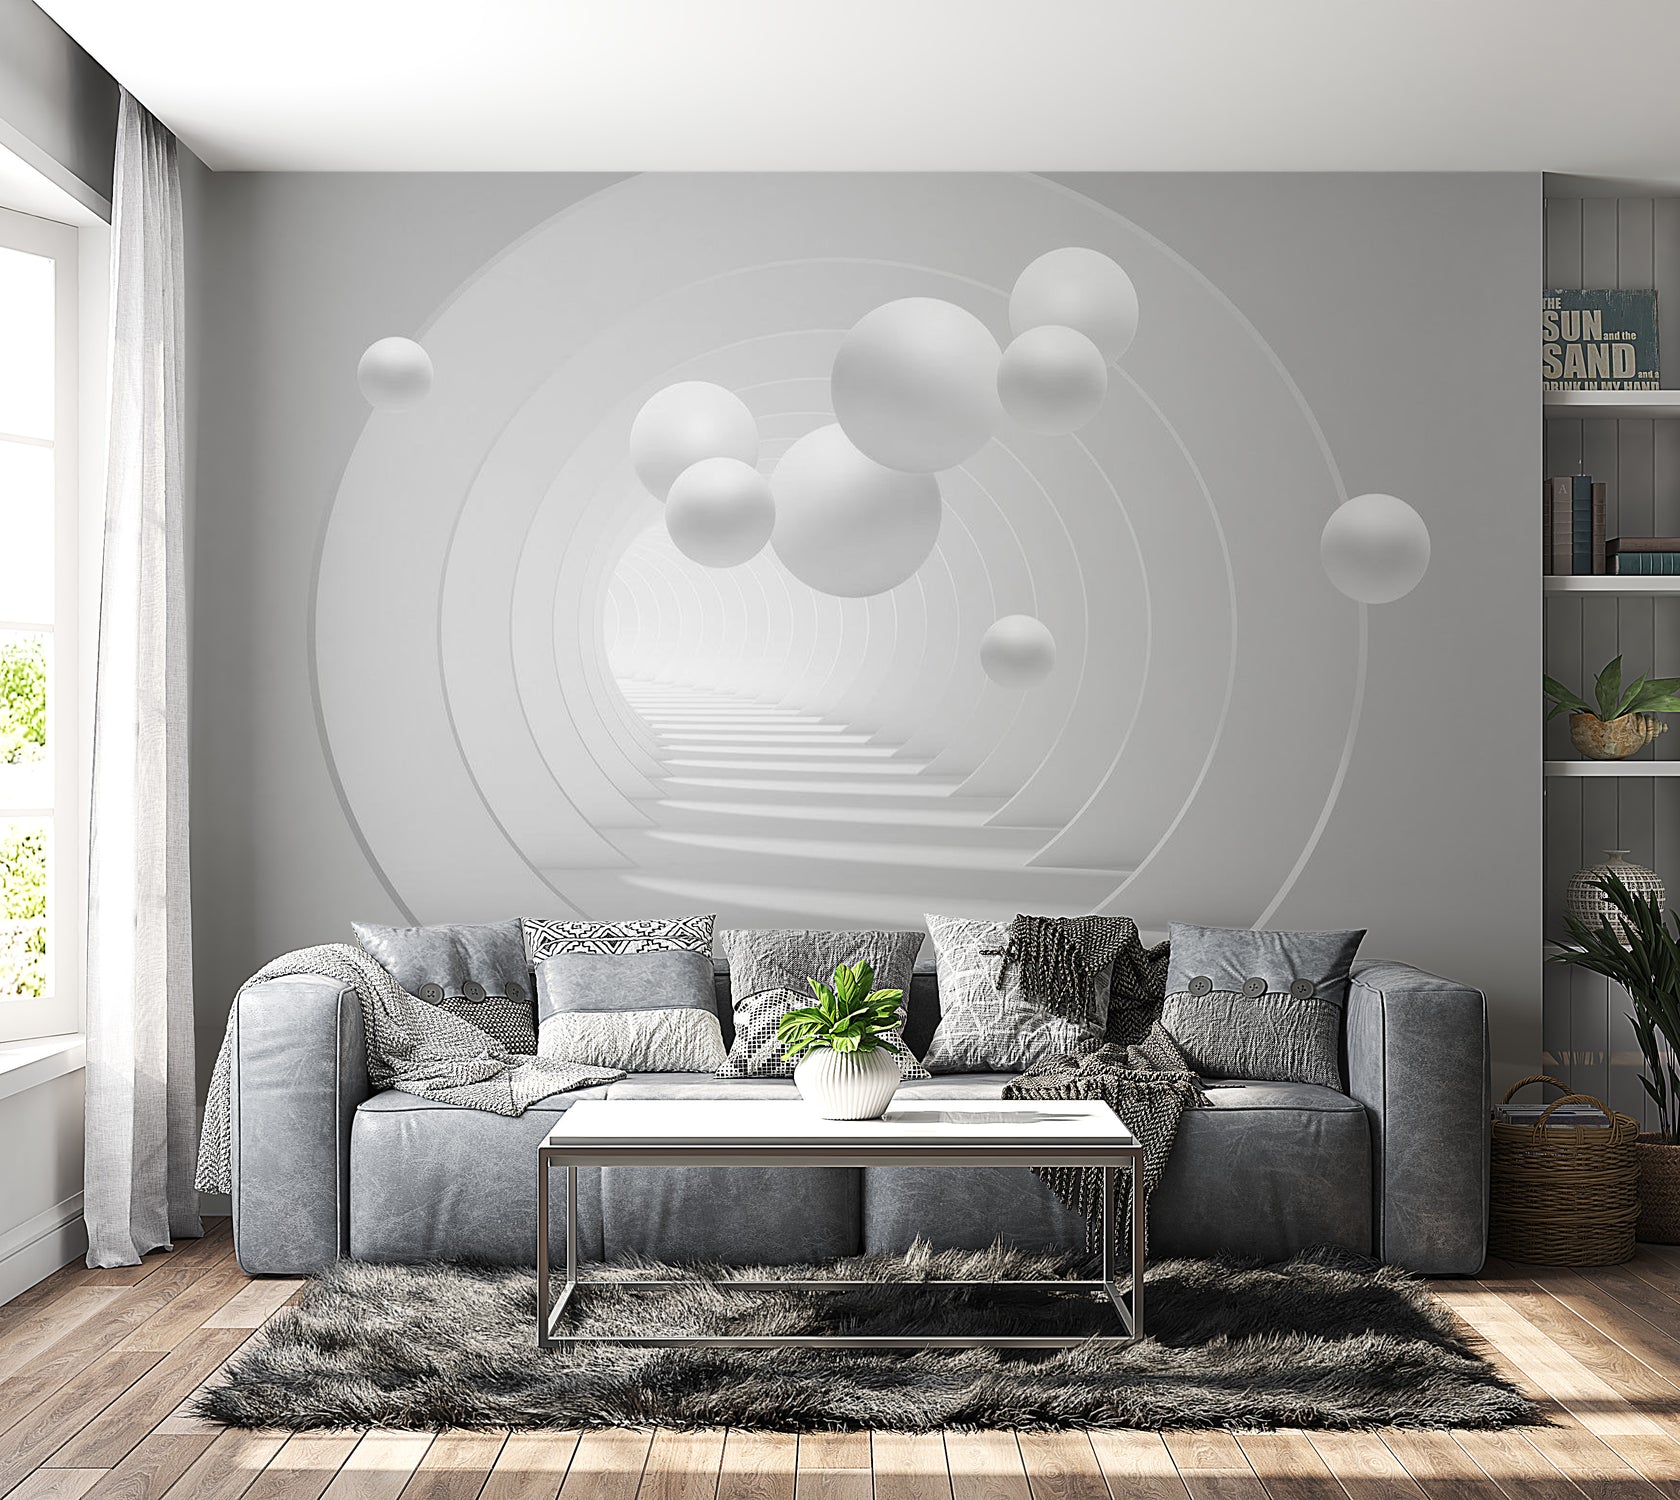 Peel & Stick 3D Illusion Wall Mural - 3D Tunnel - Removable Wall Decals